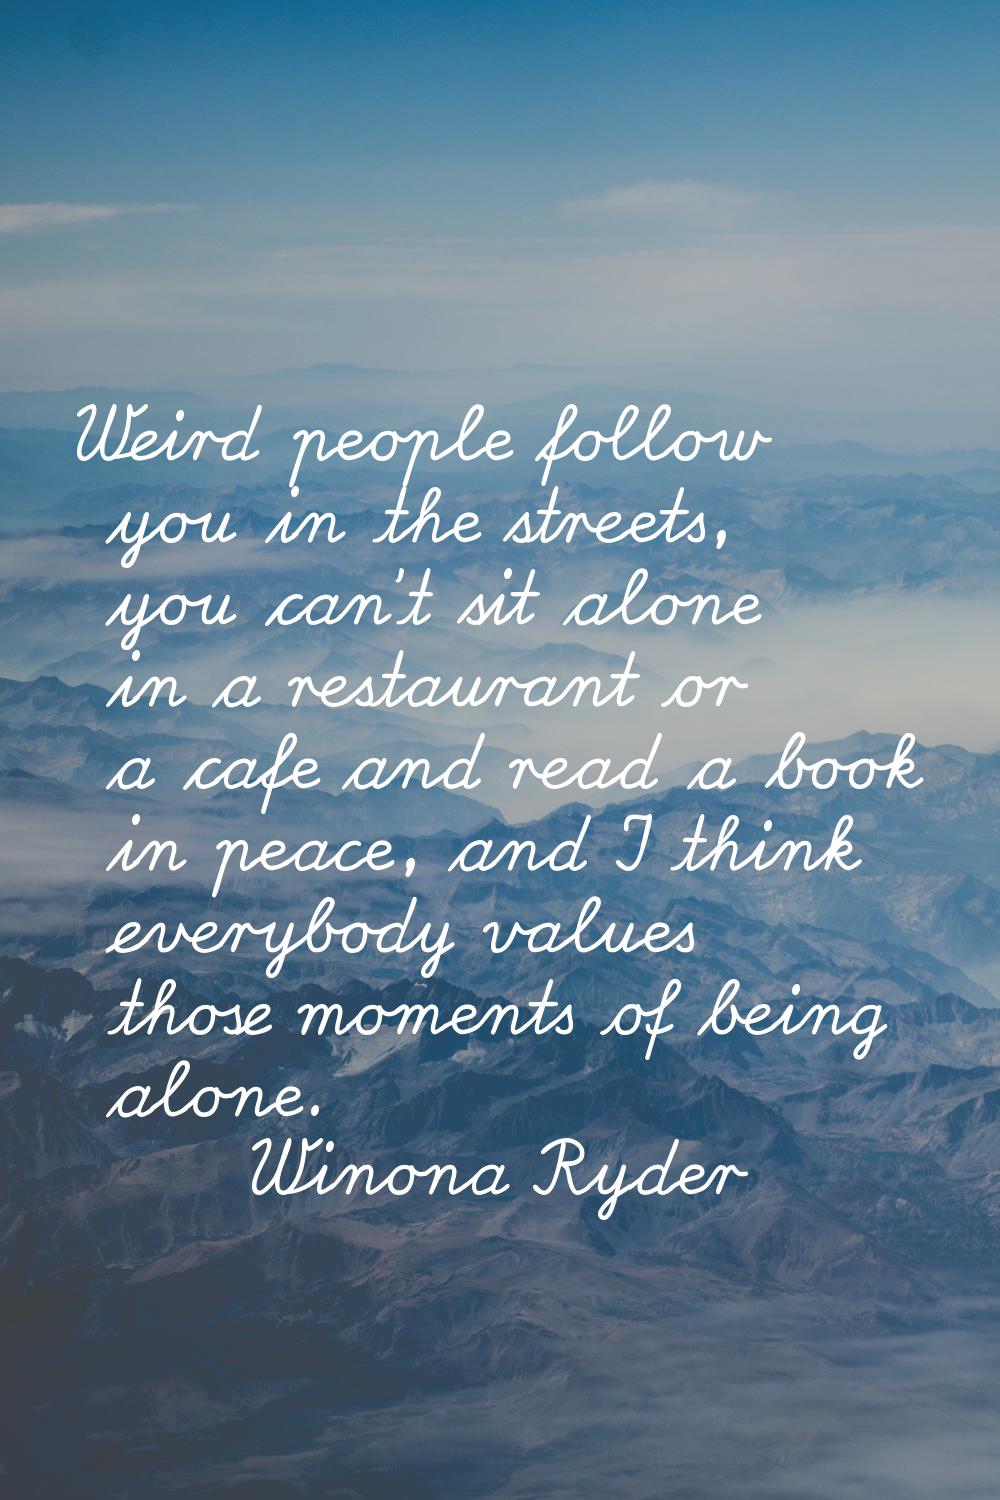 Weird people follow you in the streets, you can't sit alone in a restaurant or a cafe and read a bo